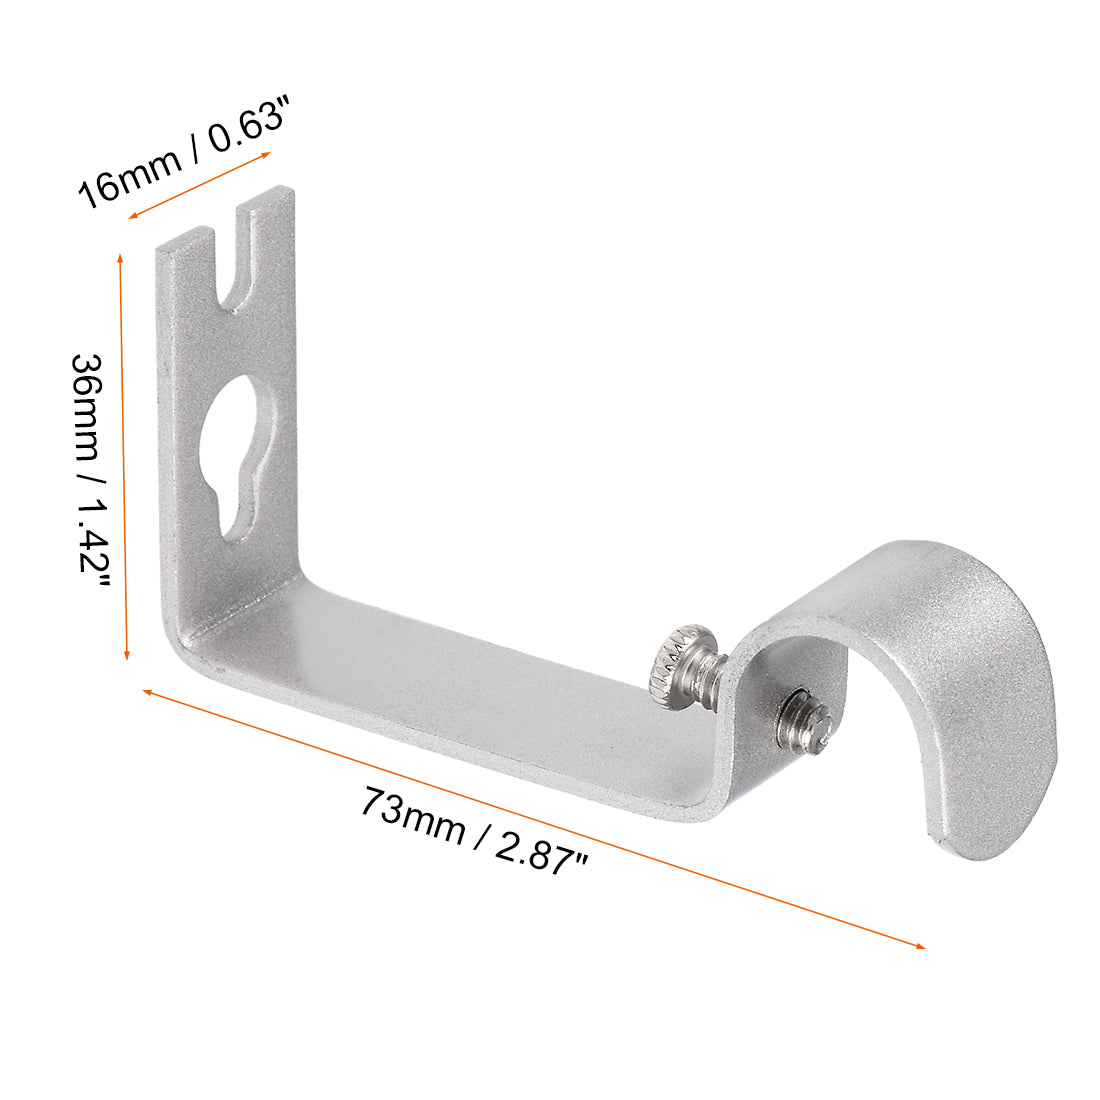 uxcell Uxcell Curtain Rod Bracket Iron Single Holder Support for 16mm Drapery Rod, 73 x 36 x 16mm Silver Tone 2Pcs